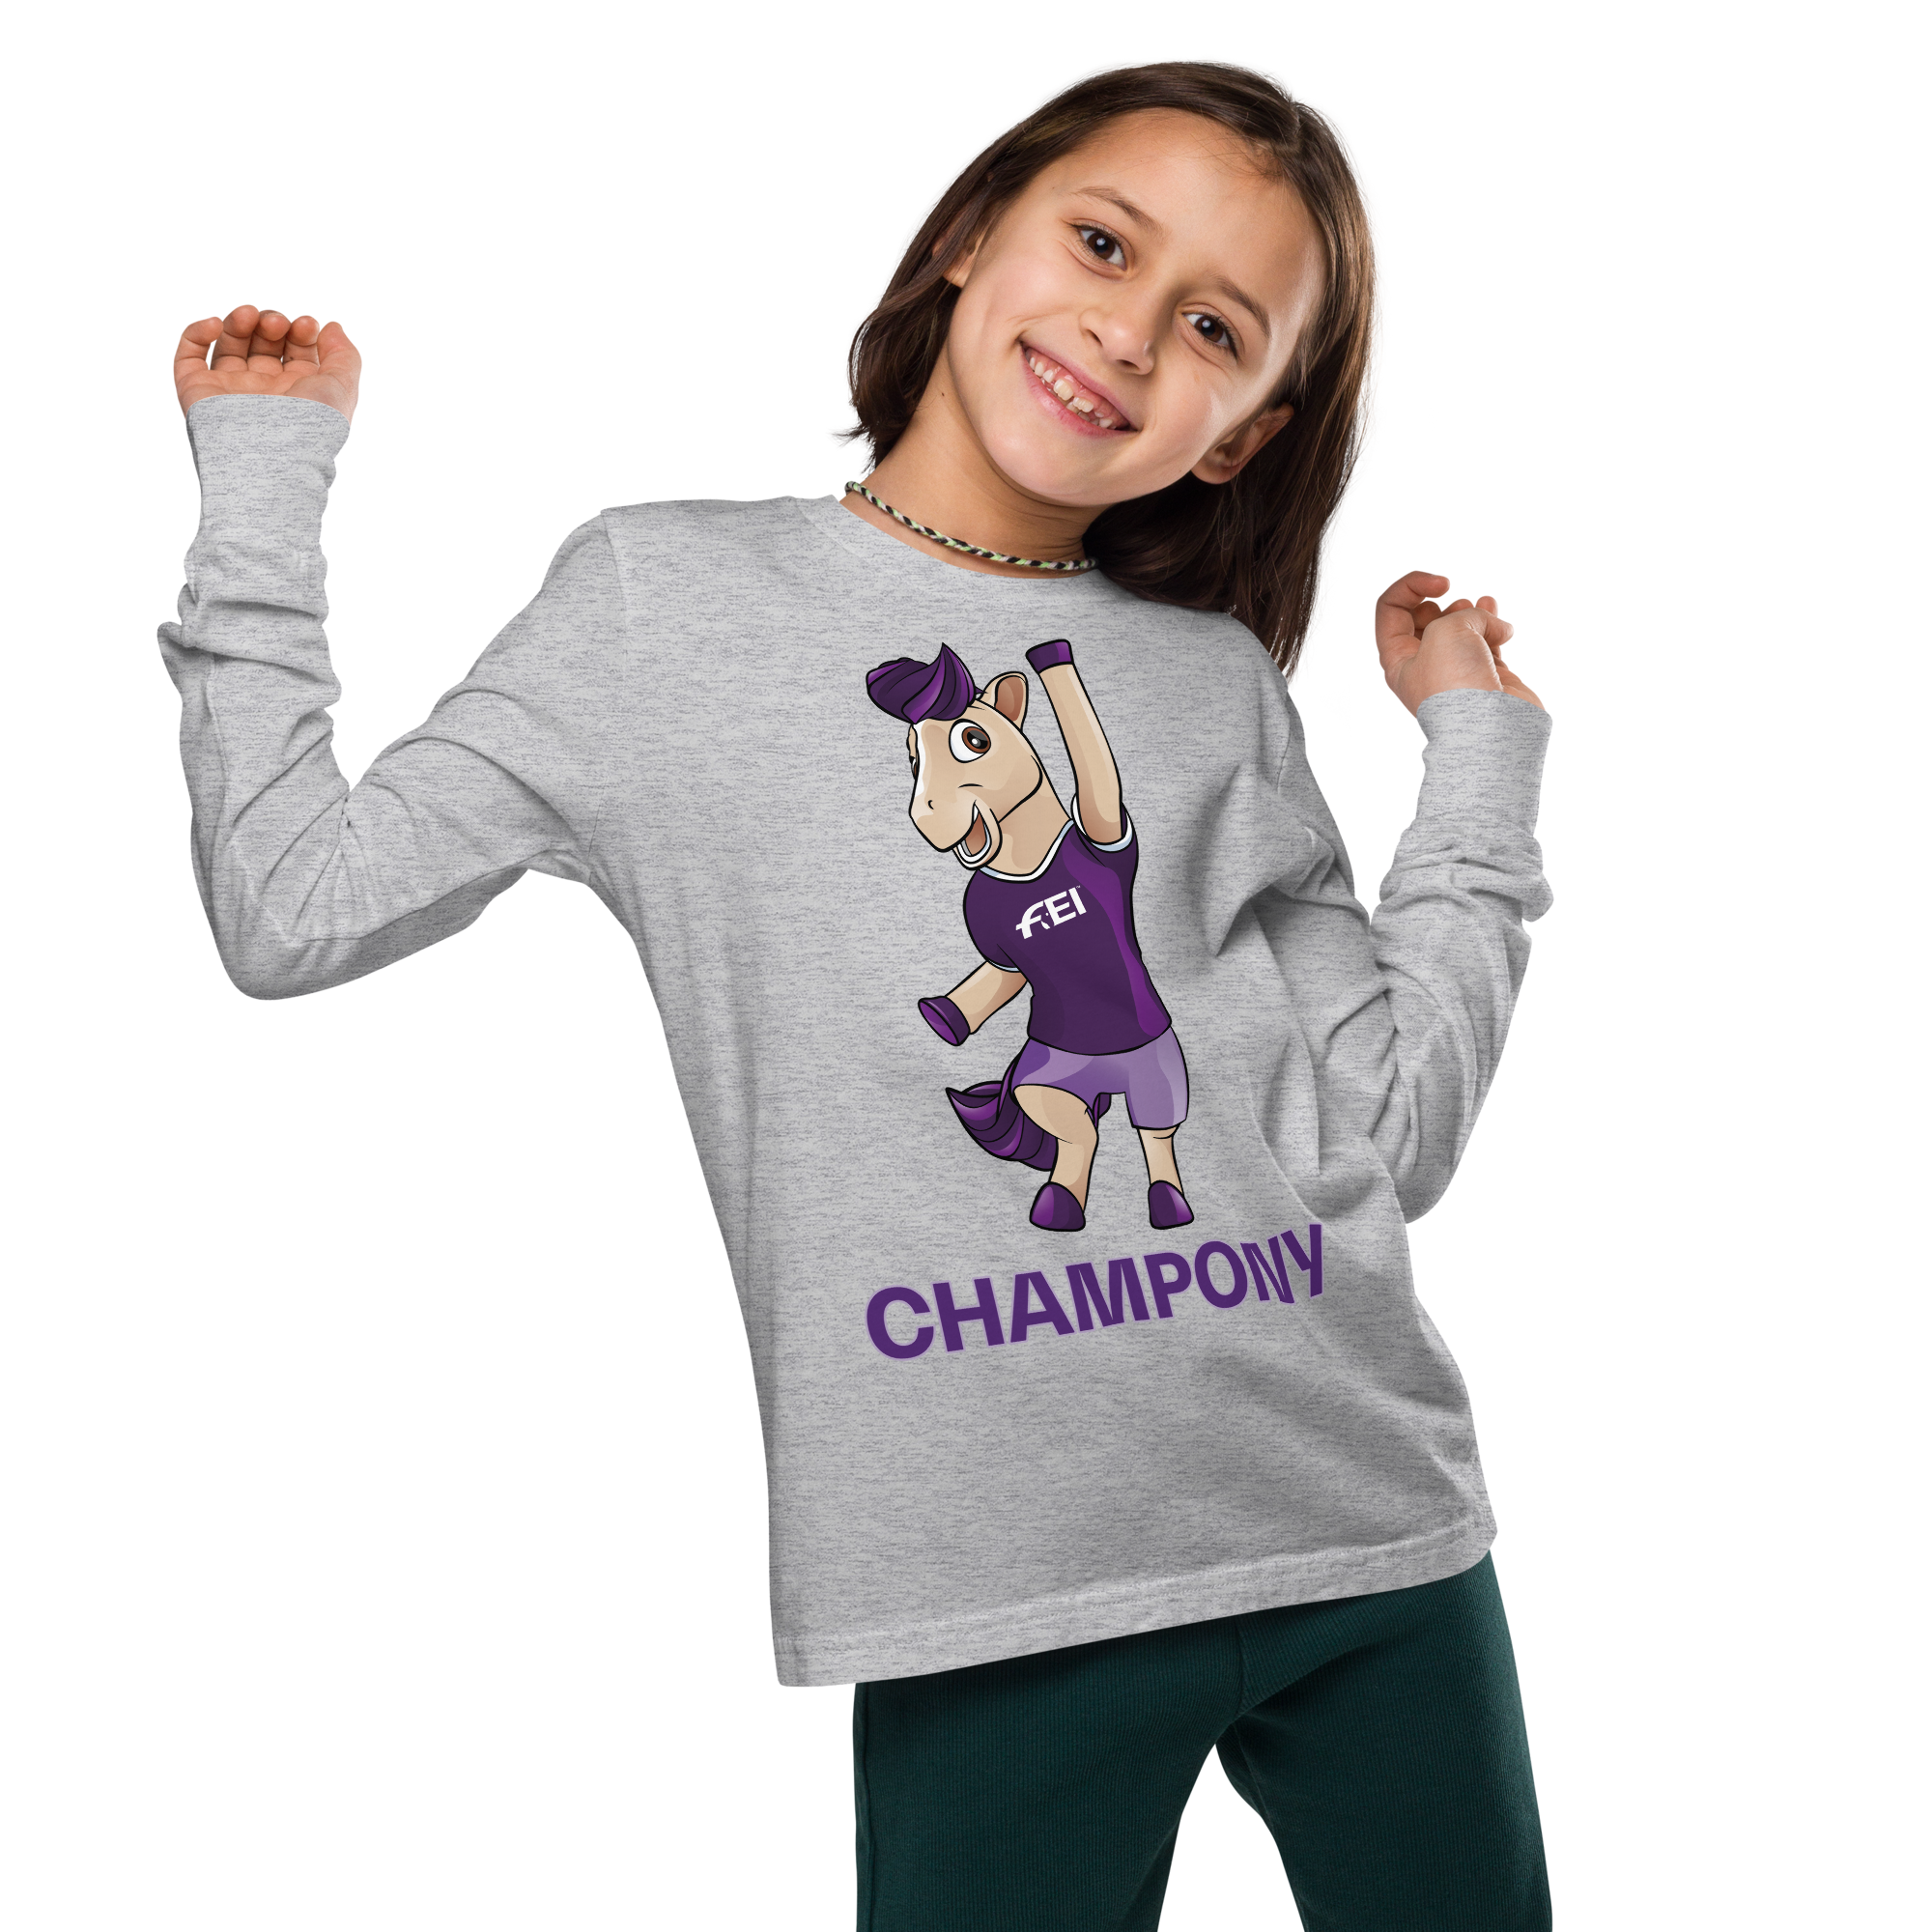 FEI Champony Youth Long Sleeve FEI Official Store